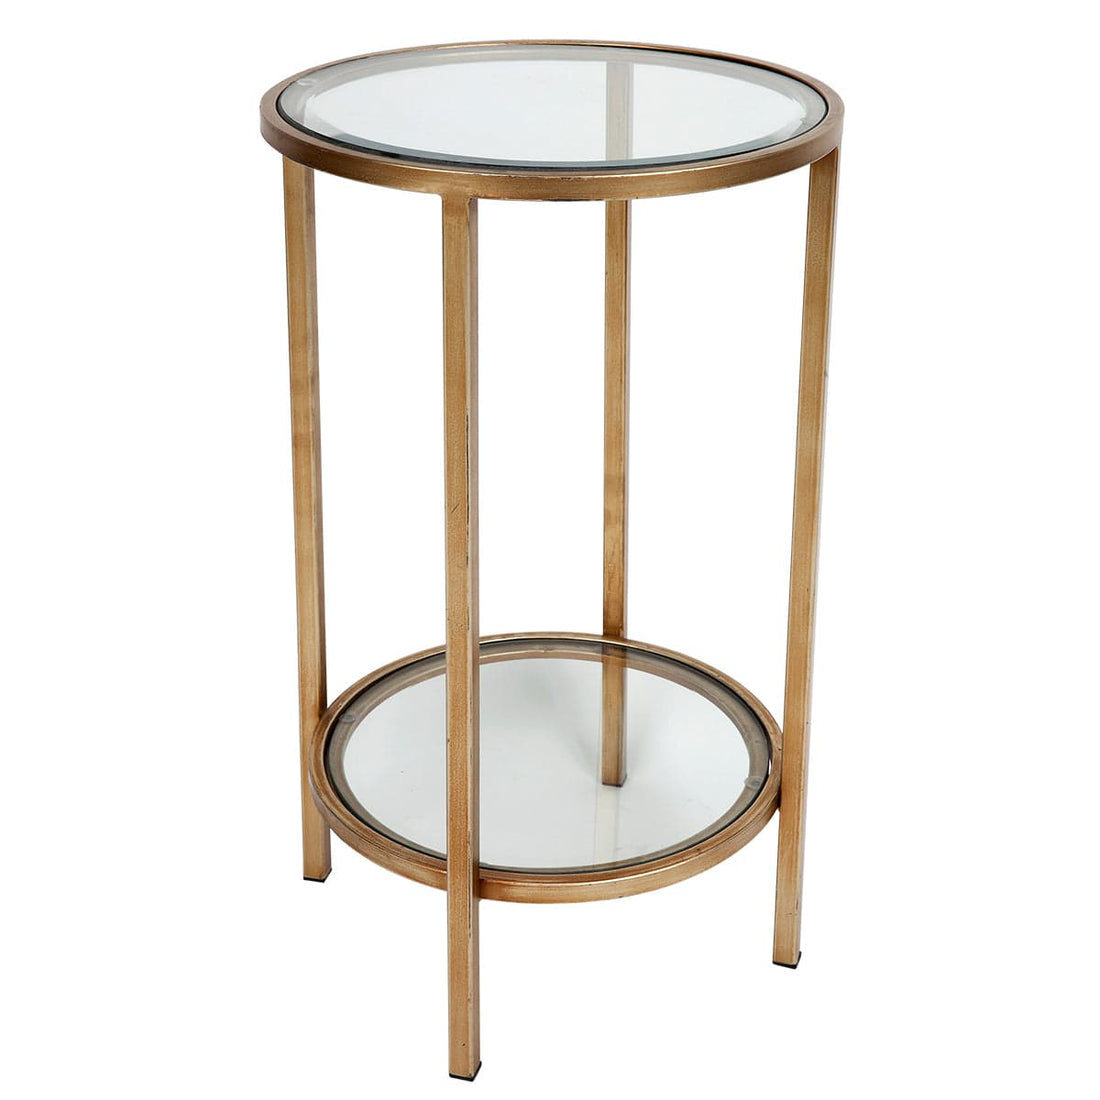 Cafe Lighting & Living Cocktail Glass Petite Side Table - Antique Gold